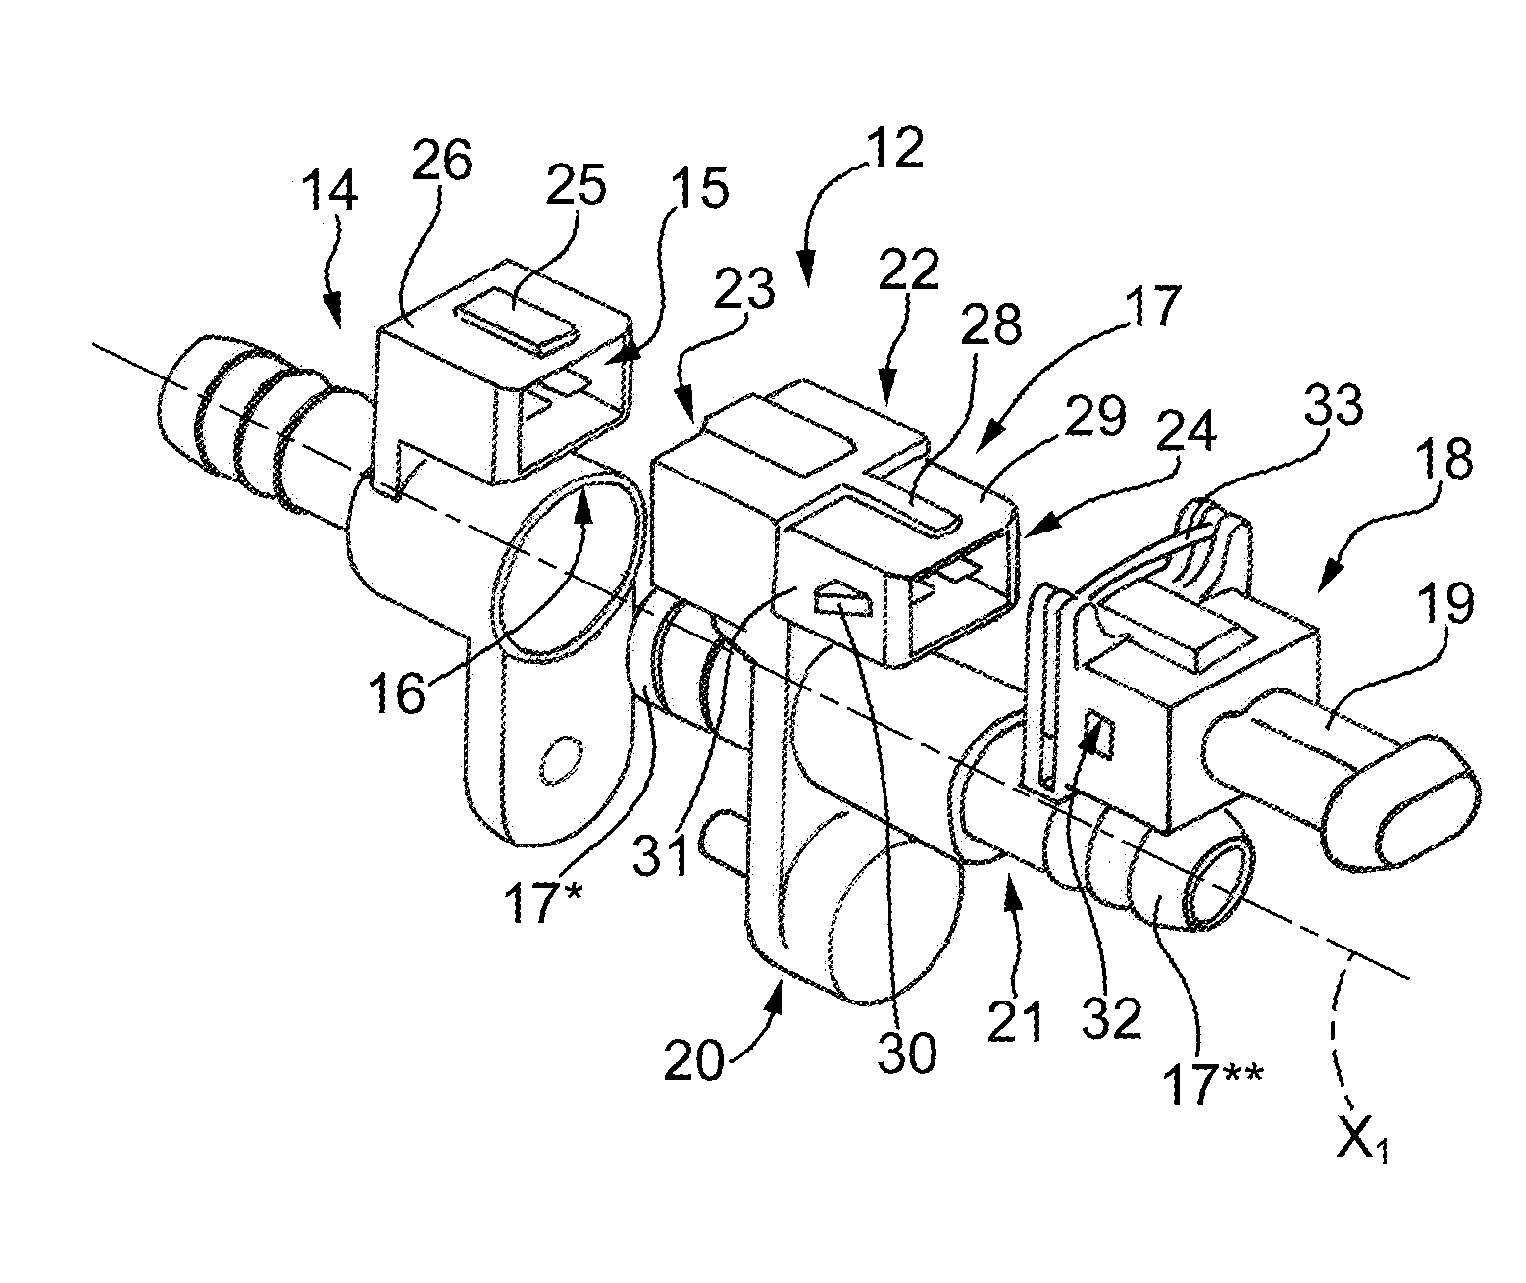 Connecting device for the fluid-tight connection between two pipes in an internal combustion engine